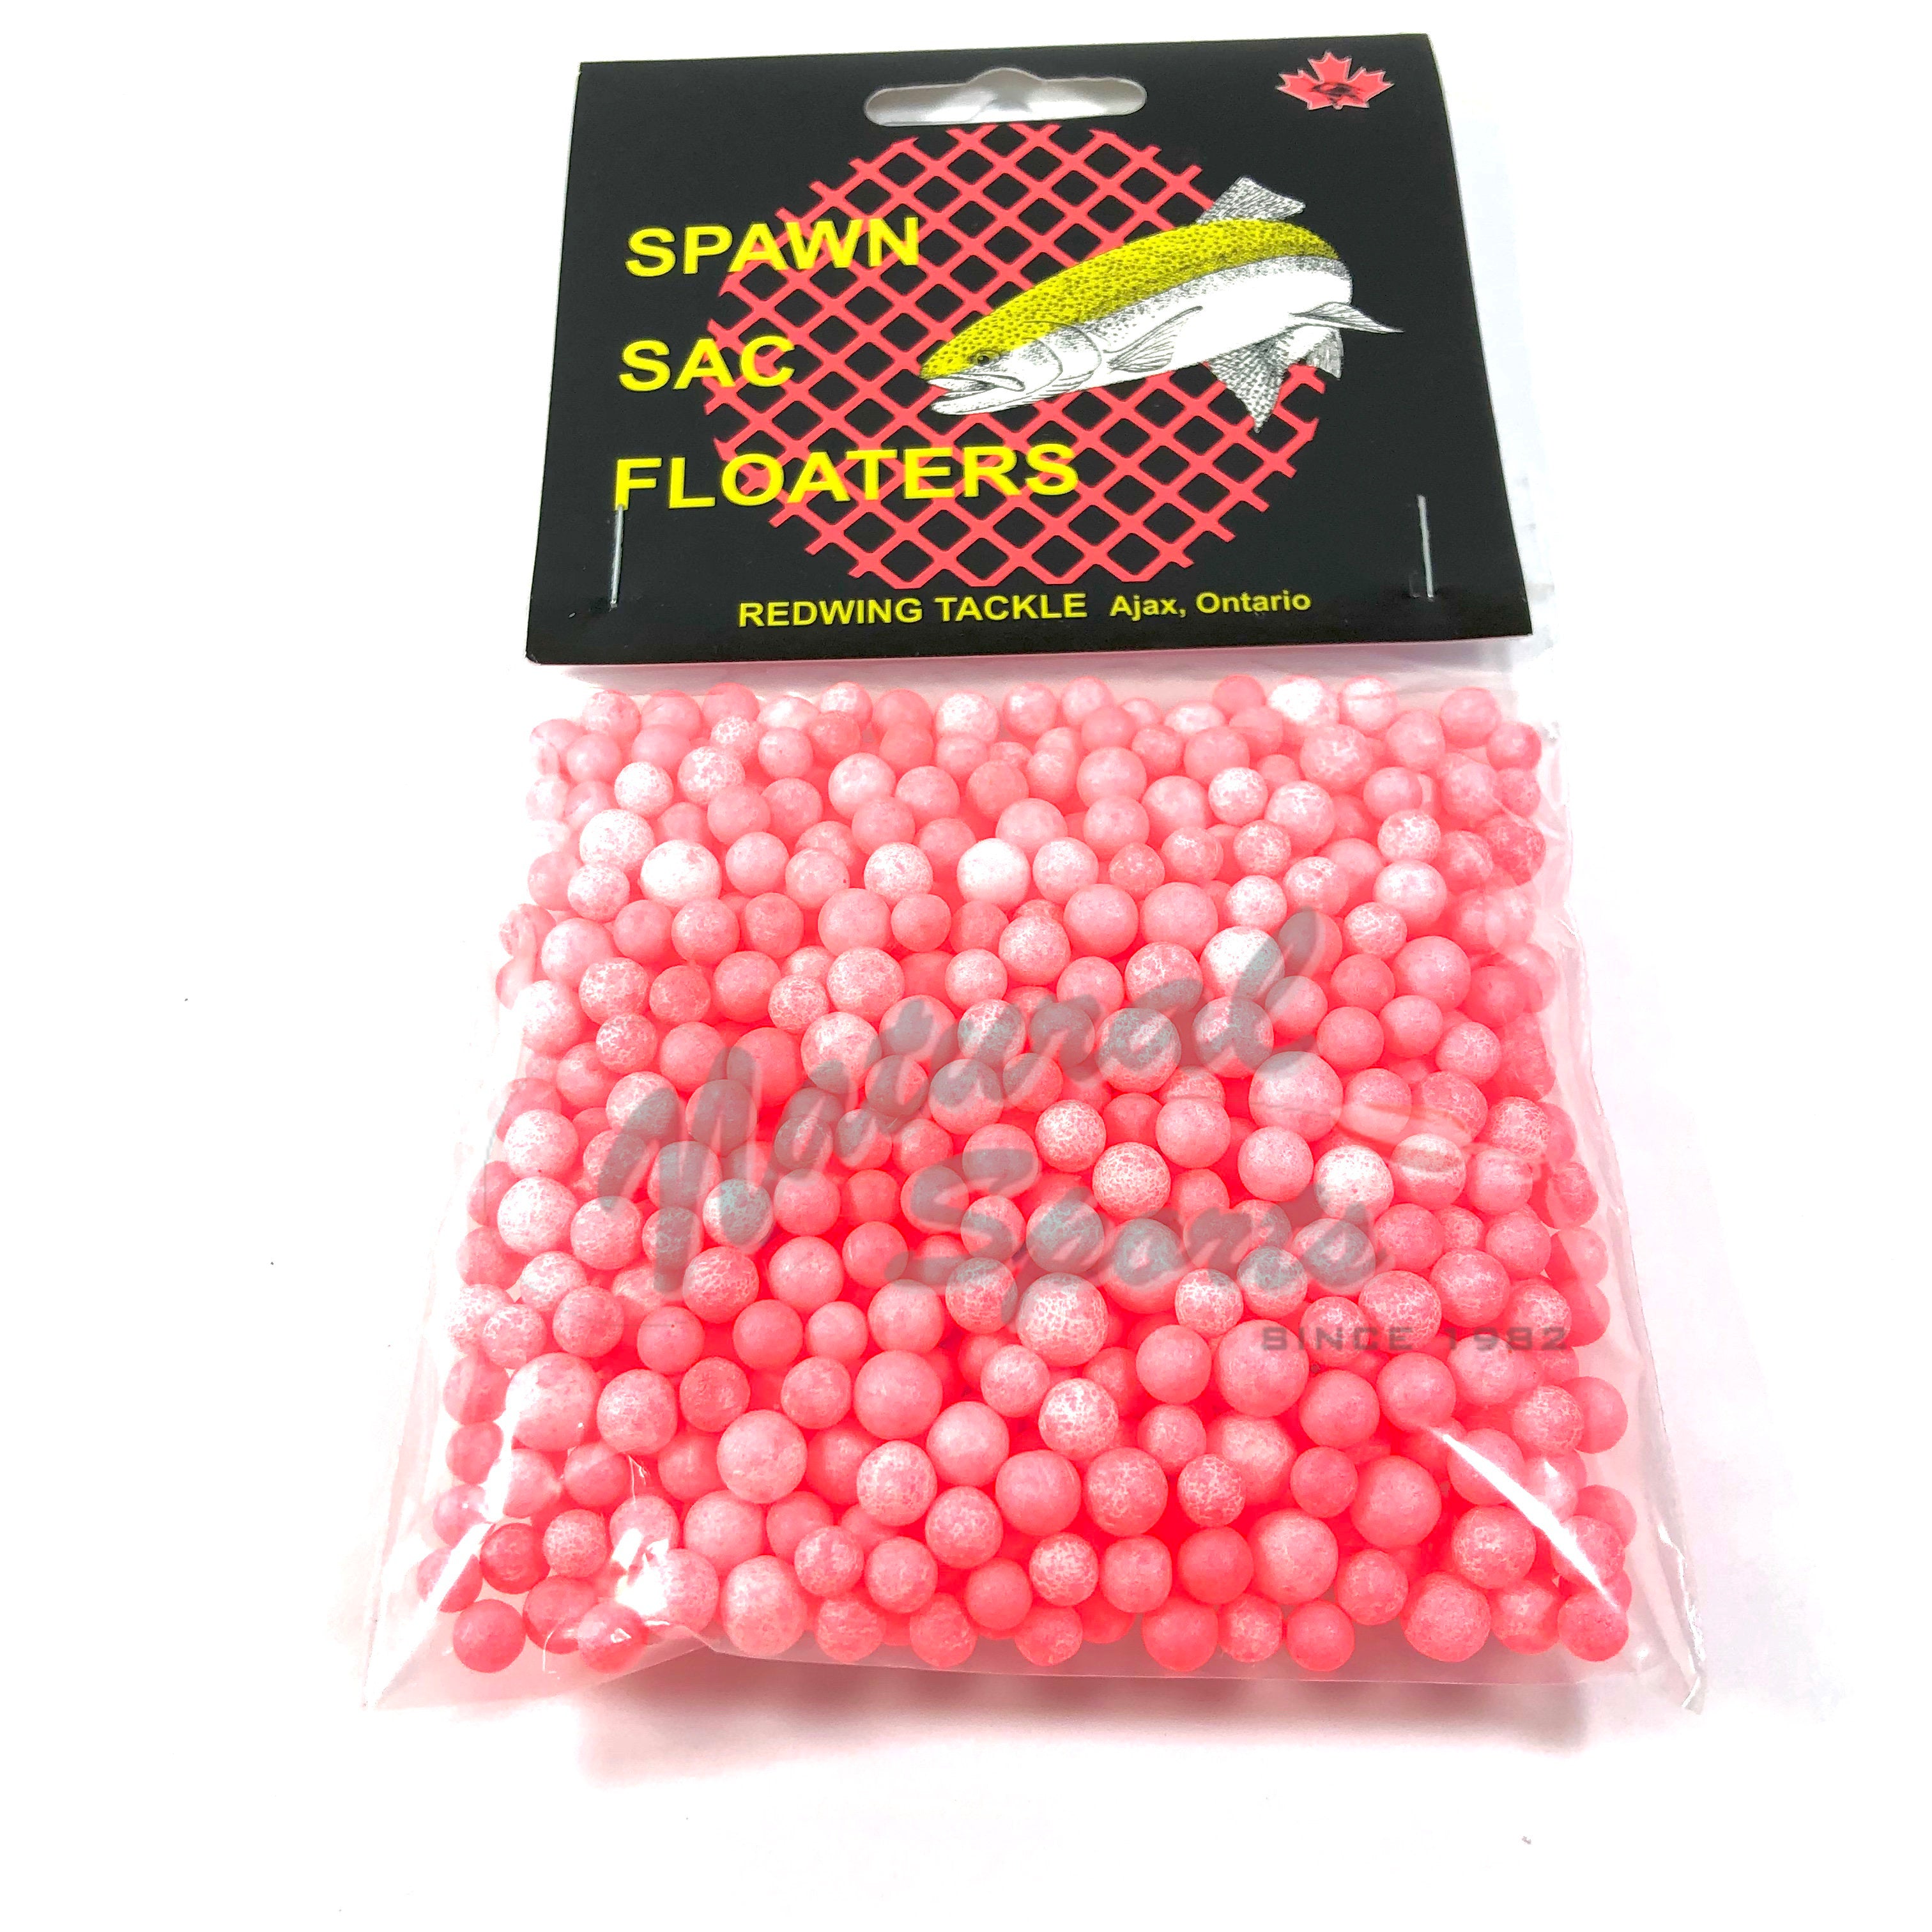 Redwing Spawn Sac Floaters – Natural Sports - The Fishing Store